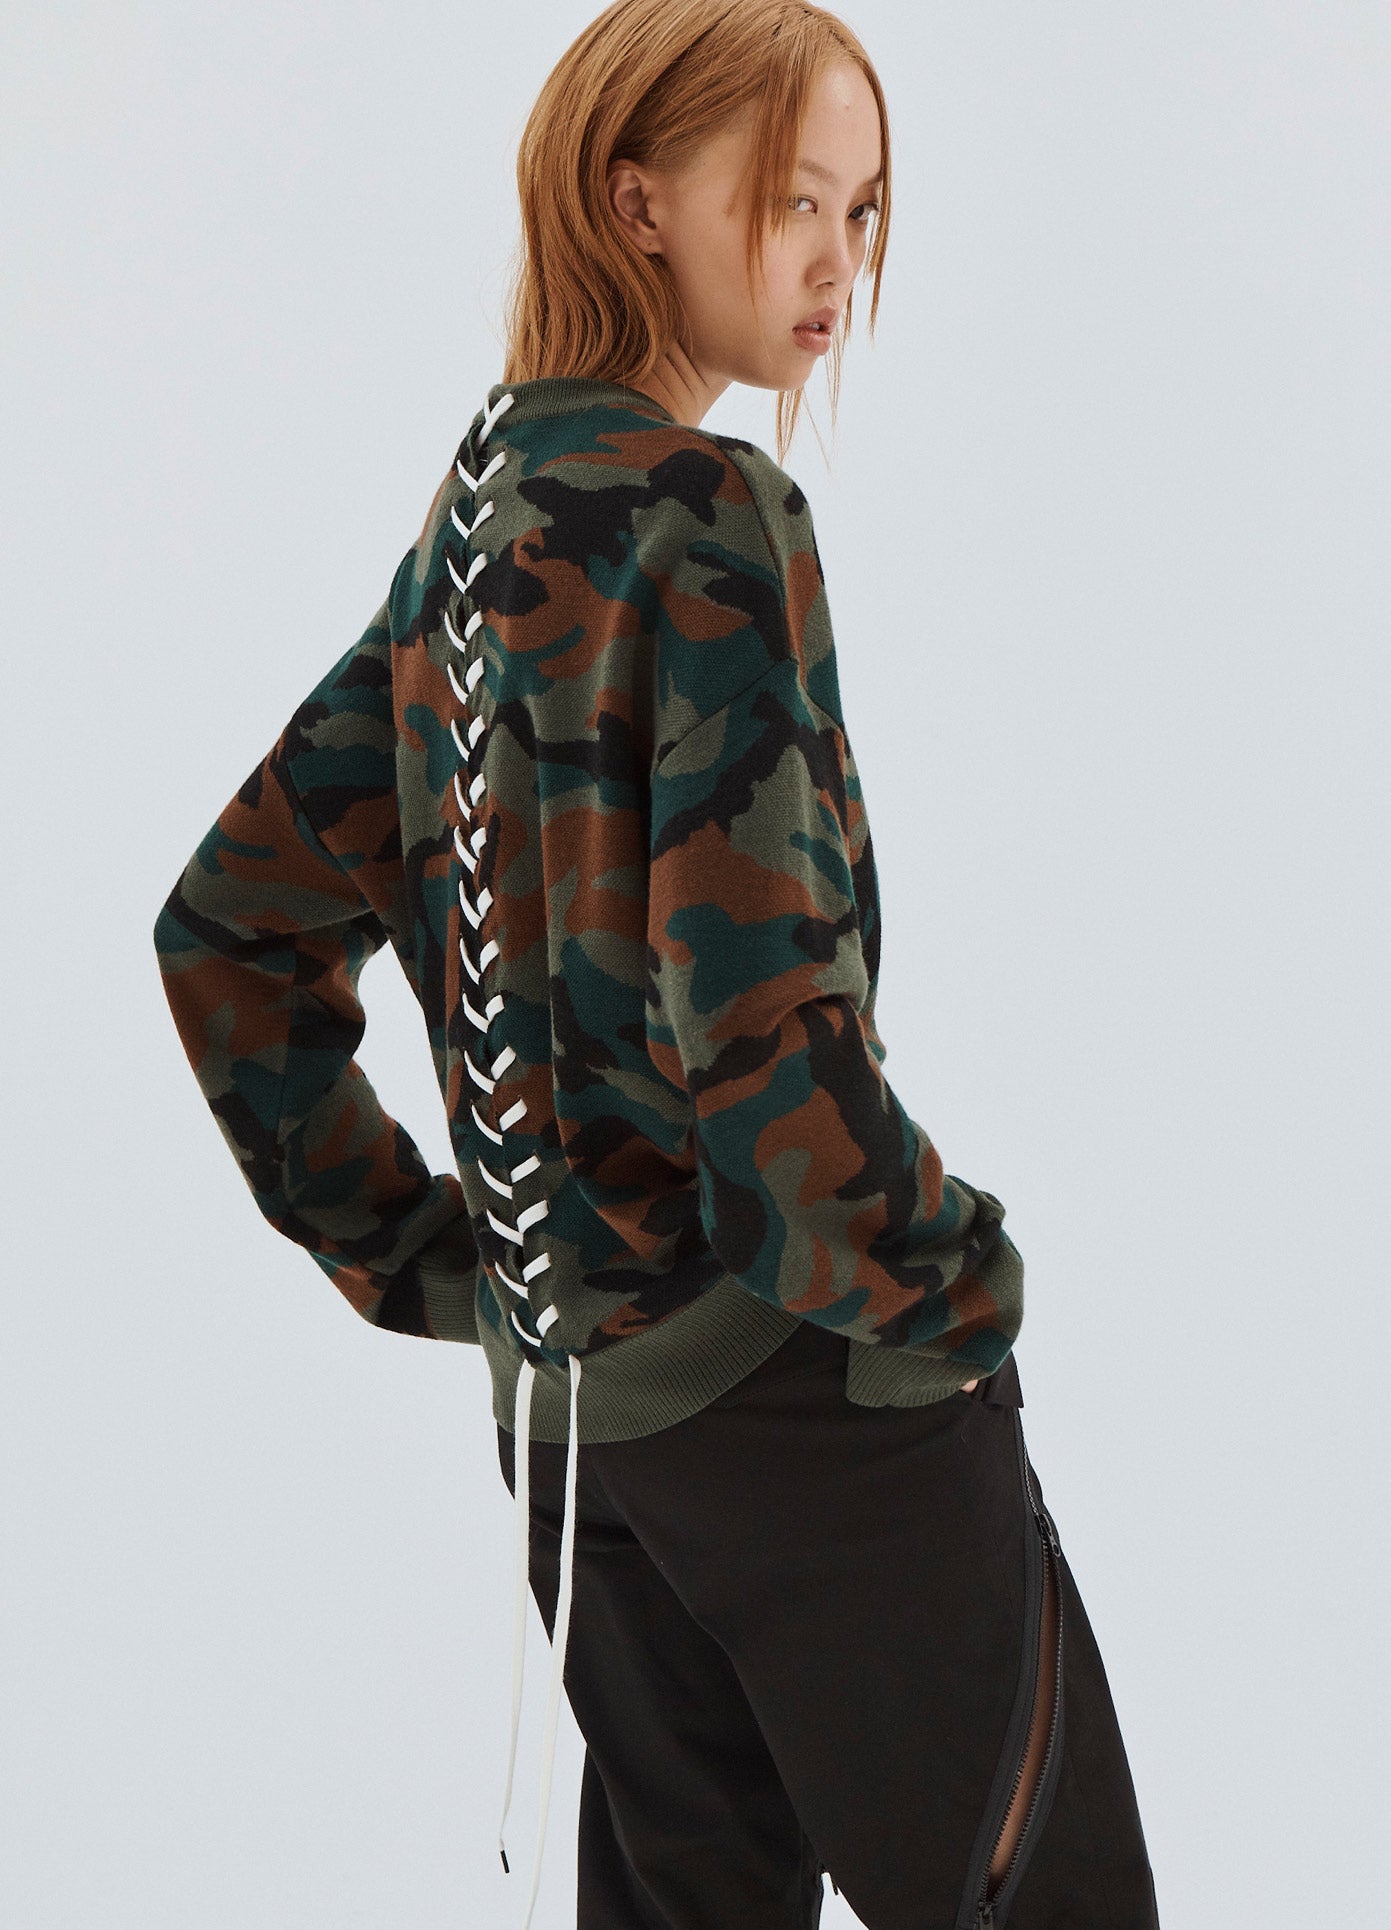 MONSE Boxy Camo Laced Up Sweater on Model Full Side View